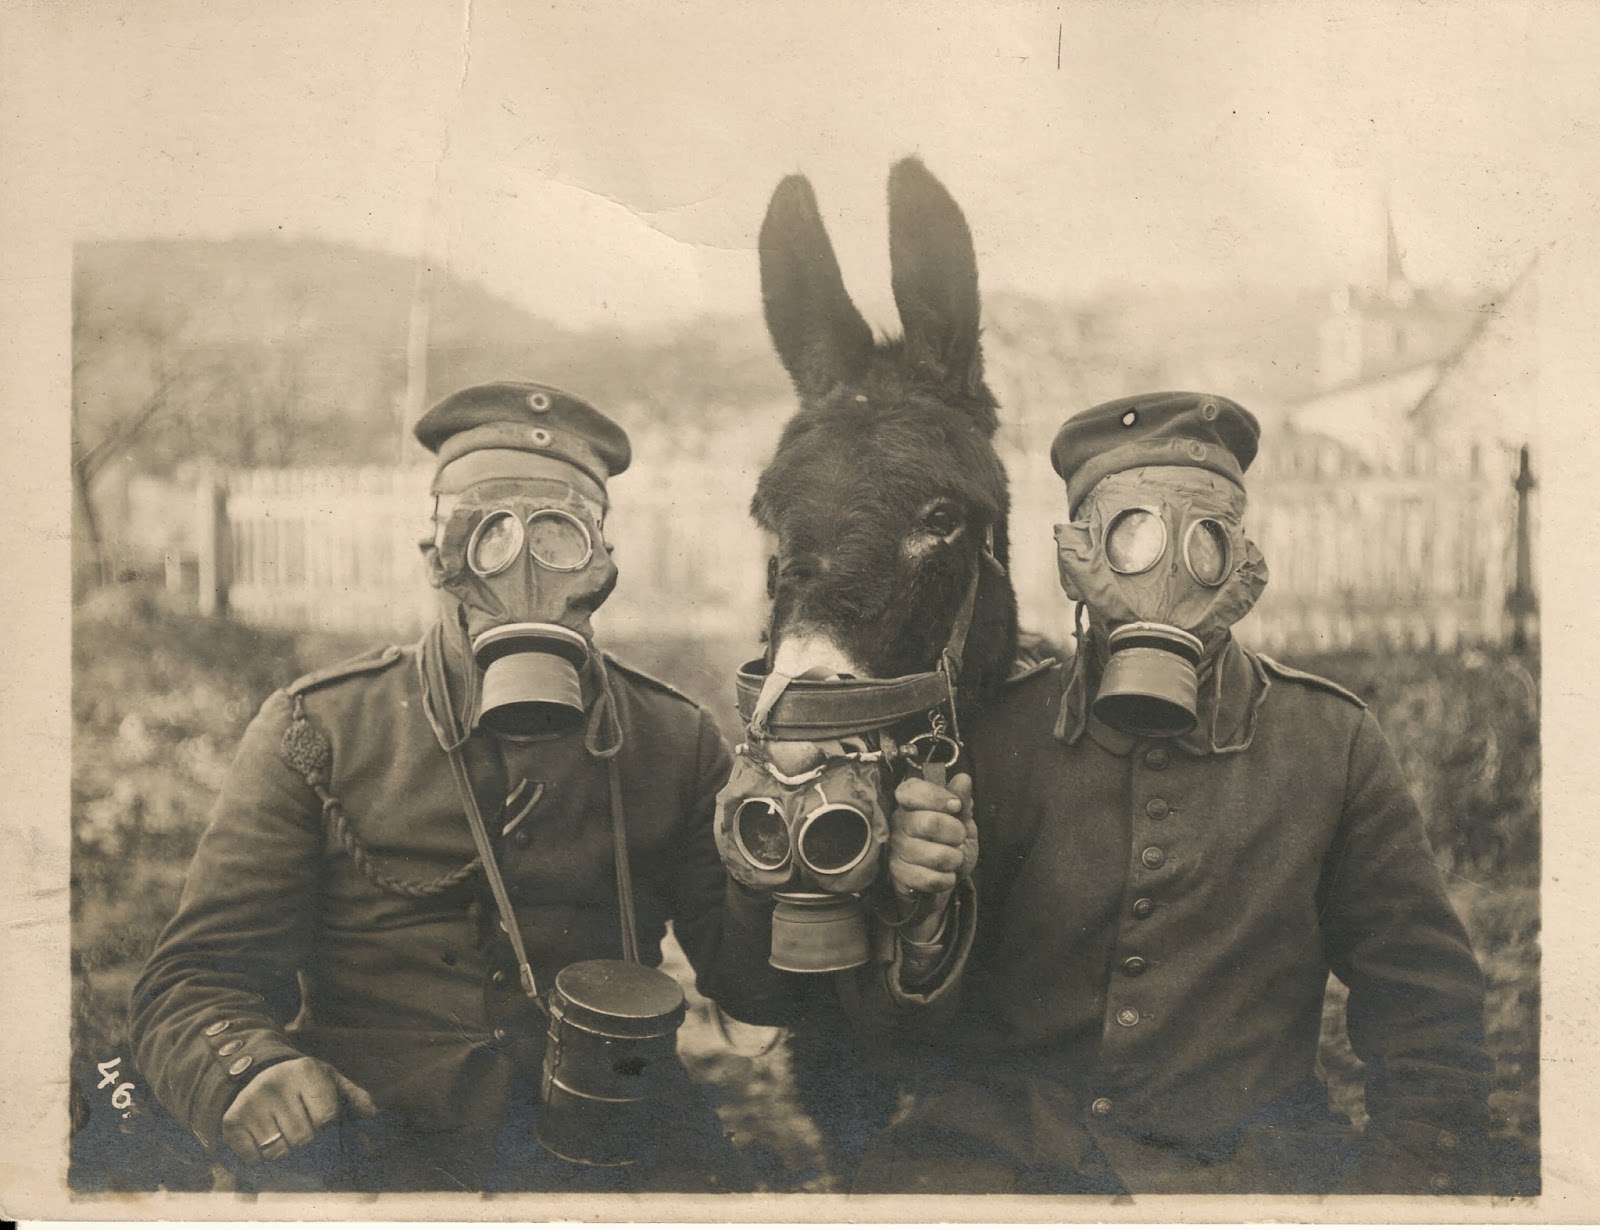 16 - Two German soldiers and their mule wearing gas masks in WWI 1916